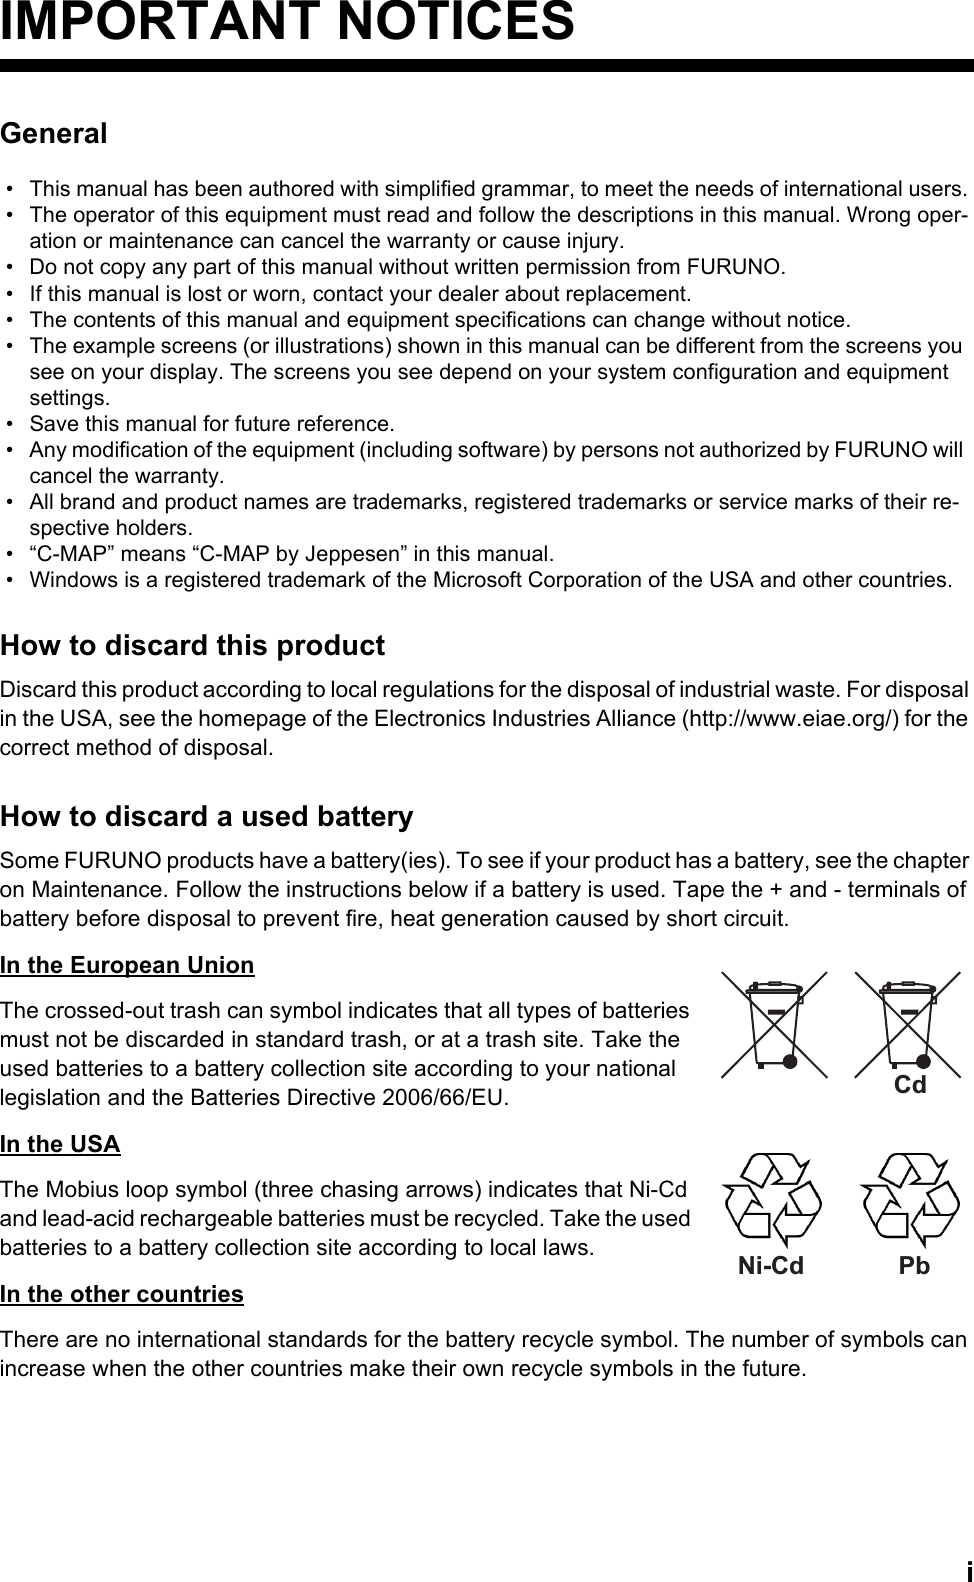 iIMPORTANT NOTICESGeneralHow to discard this productDiscard this product according to local regulations for the disposal of industrial waste. For disposal in the USA, see the homepage of the Electronics Industries Alliance (http://www.eiae.org/) for the correct method of disposal.How to discard a used batterySome FURUNO products have a battery(ies). To see if your product has a battery, see the chapter on Maintenance. Follow the instructions below if a battery is used. Tape the + and - terminals of battery before disposal to prevent fire, heat generation caused by short circuit.In the European UnionThe crossed-out trash can symbol indicates that all types of batteries must not be discarded in standard trash, or at a trash site. Take the used batteries to a battery collection site according to your national legislation and the Batteries Directive 2006/66/EU. In the USAThe Mobius loop symbol (three chasing arrows) indicates that Ni-Cd and lead-acid rechargeable batteries must be recycled. Take the used batteries to a battery collection site according to local laws.In the other countriesThere are no international standards for the battery recycle symbol. The number of symbols can increase when the other countries make their own recycle symbols in the future.•  This manual has been authored with simplified grammar, to meet the needs of international users.•  The operator of this equipment must read and follow the descriptions in this manual. Wrong oper-ation or maintenance can cancel the warranty or cause injury.•  Do not copy any part of this manual without written permission from FURUNO.•  If this manual is lost or worn, contact your dealer about replacement.•  The contents of this manual and equipment specifications can change without notice.•  The example screens (or illustrations) shown in this manual can be different from the screens you see on your display. The screens you see depend on your system configuration and equipment settings.•  Save this manual for future reference.•  Any modification of the equipment (including software) by persons not authorized by FURUNO will cancel the warranty.•  All brand and product names are trademarks, registered trademarks or service marks of their re-spective holders.•  “C-MAP” means “C-MAP by Jeppesen” in this manual.•  Windows is a registered trademark of the Microsoft Corporation of the USA and other countries.CdNi-Cd Pb